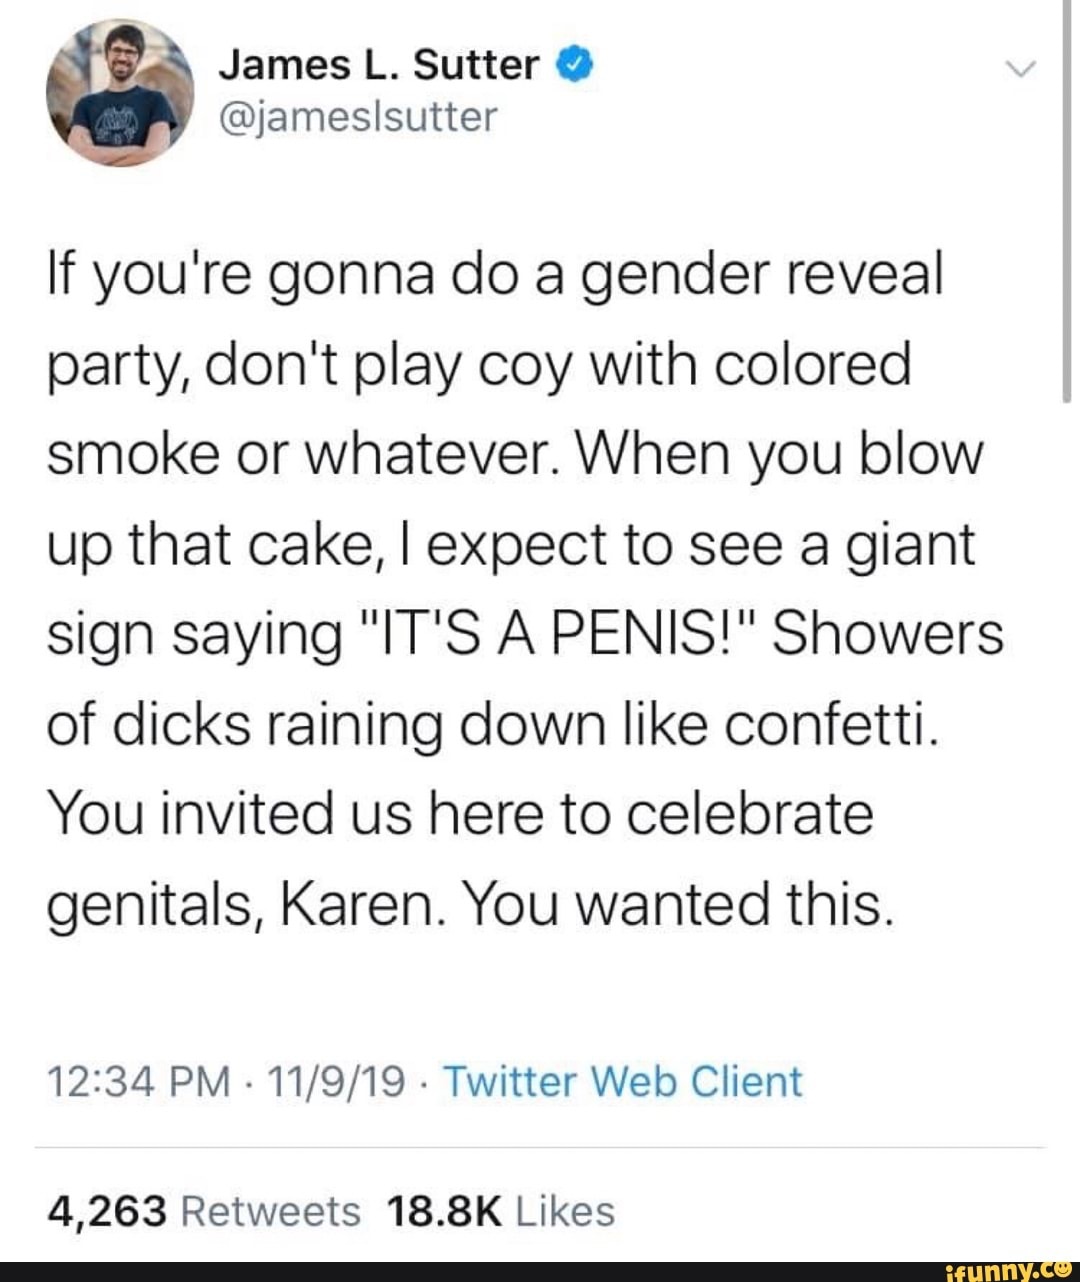 moon's haunted - James L. Sutter If you're gonna do a gender reveal party, don't play coy with colored smoke or whatever. When you blow up that cake, I expect to see a giant sign saying "It'S A Penis!" Showers of dicks raining down confetti. You invited u